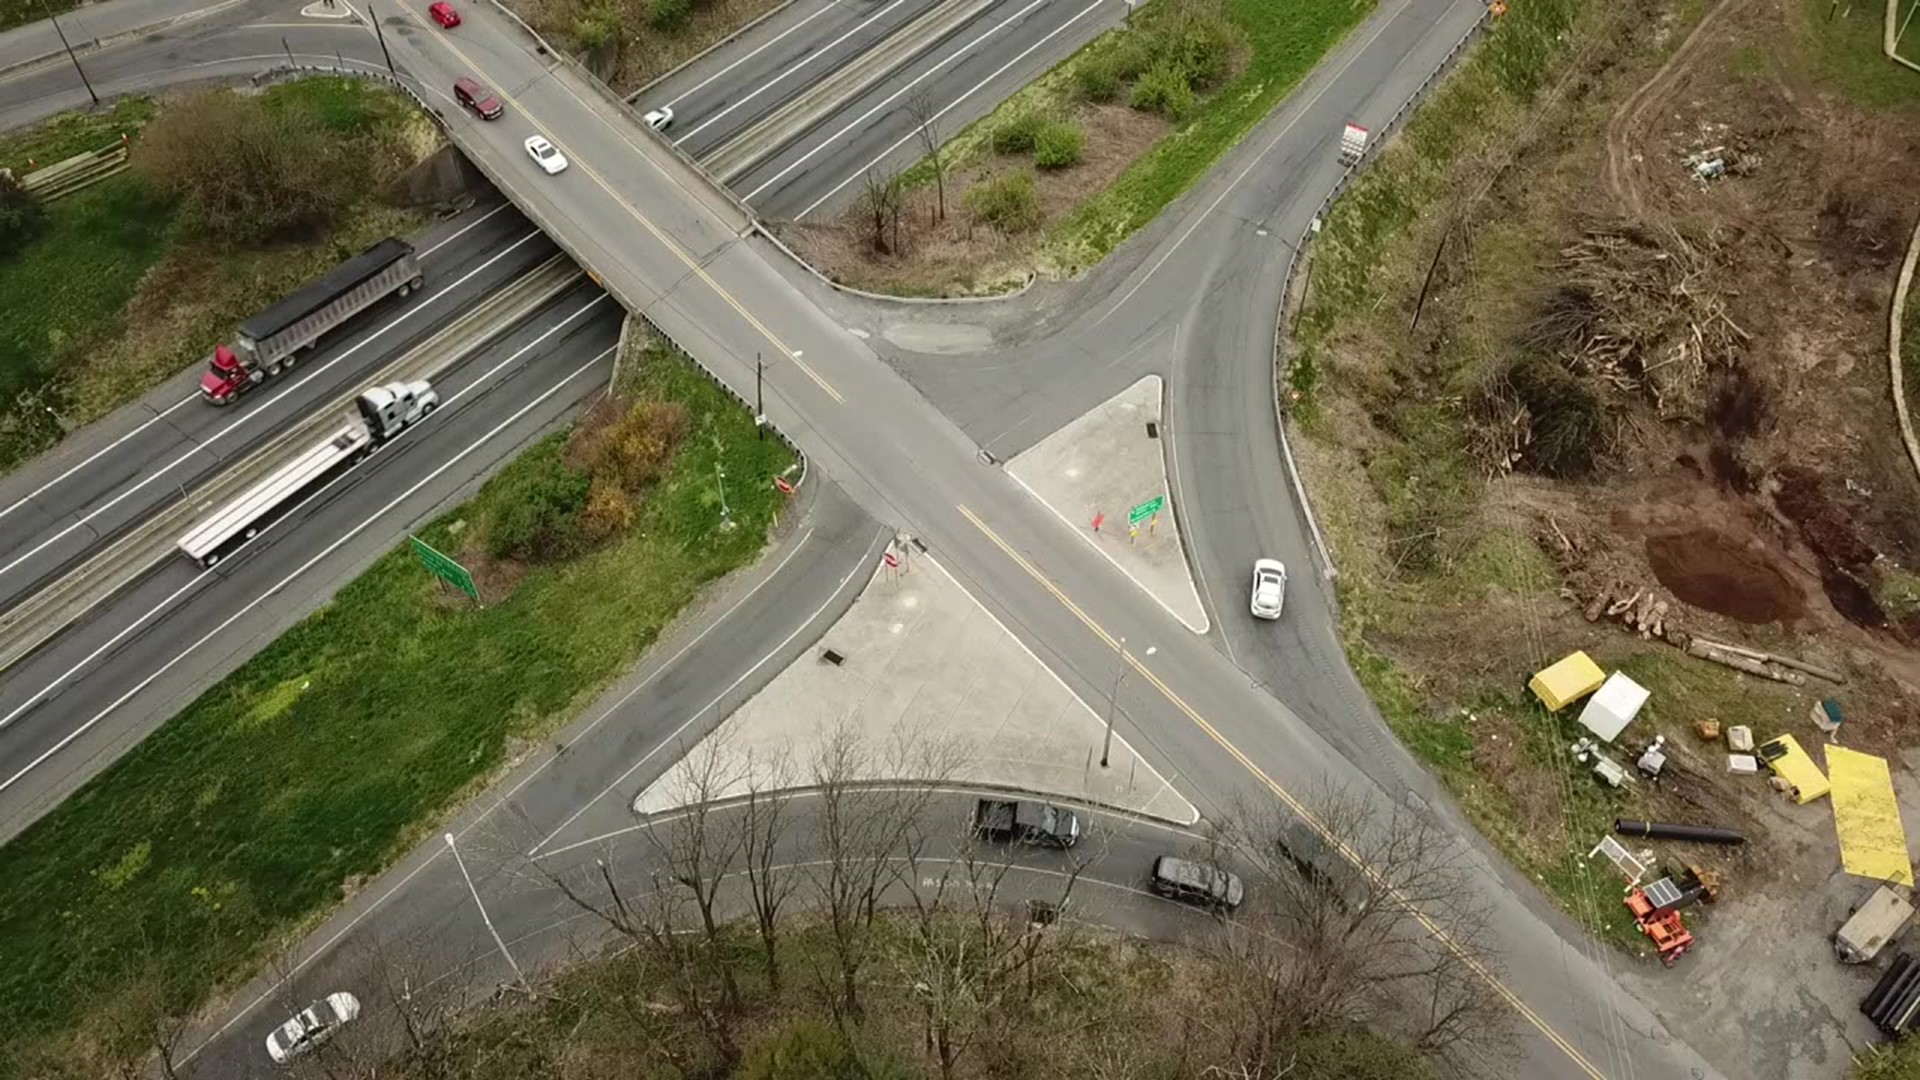 PennDOT's plans include roadway expansion, new bridges, and multiple roundabouts.